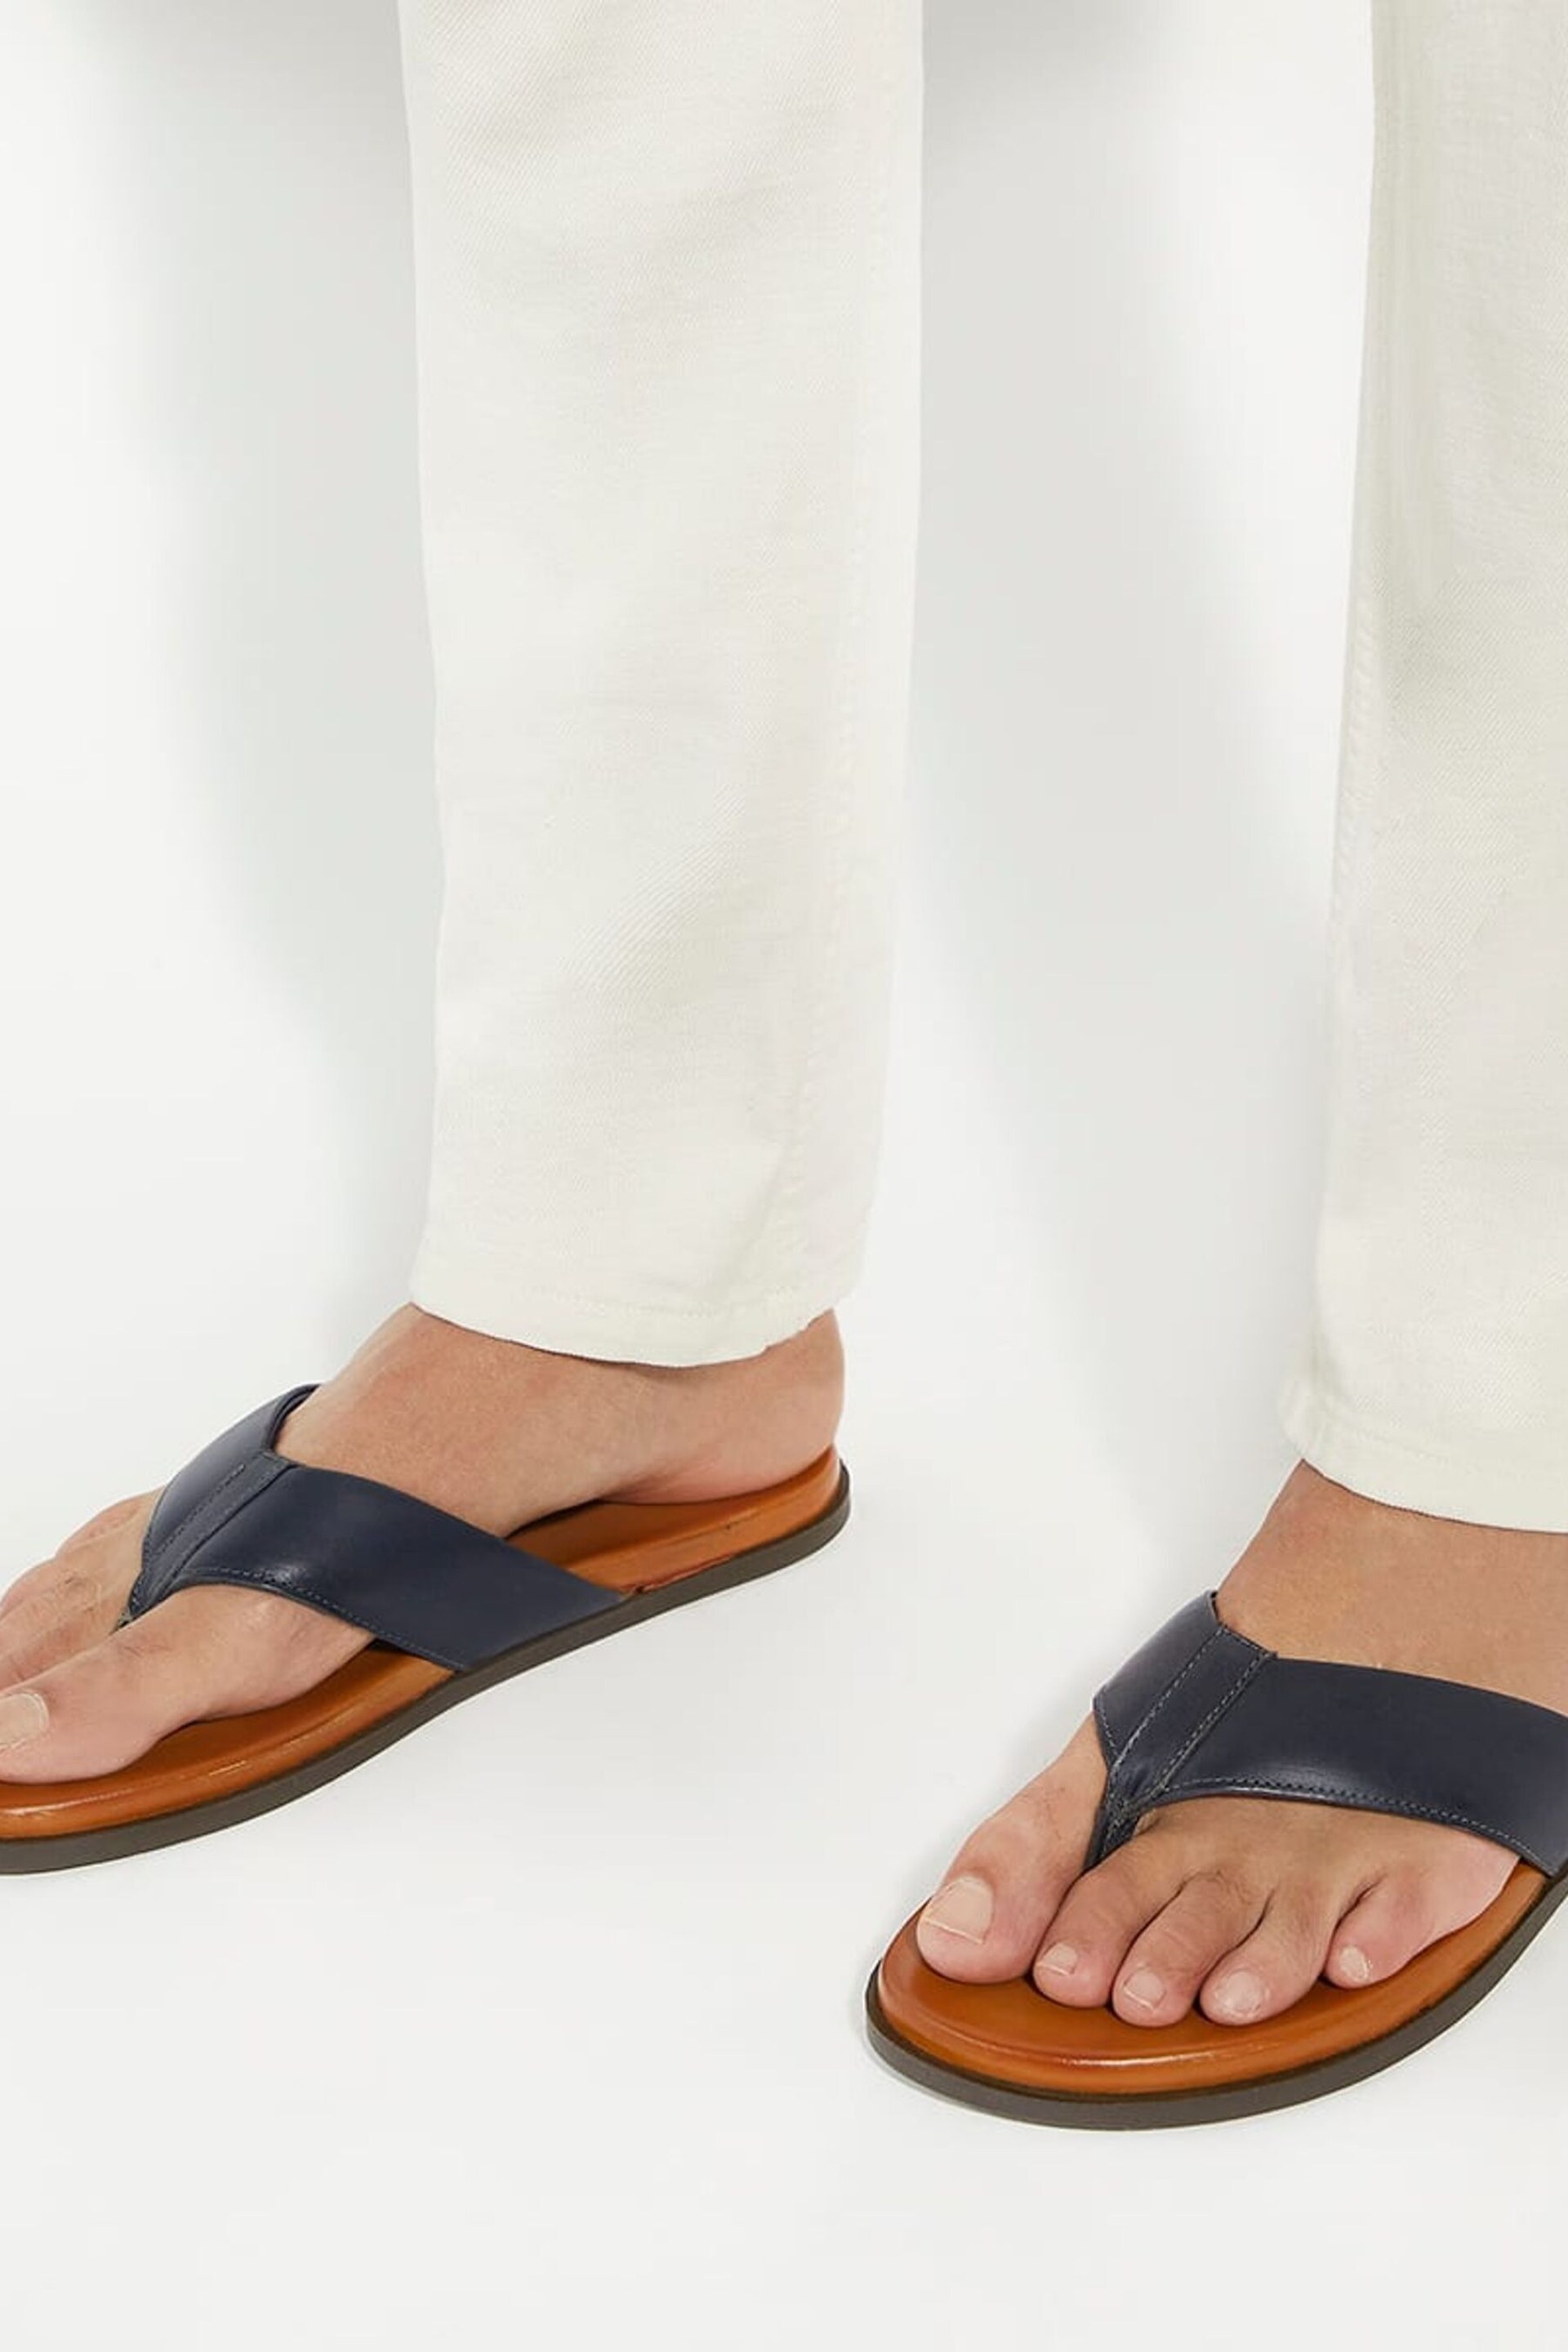 Dune London Blue Inspires Toe Post Leather Sandals - Image 7 of 7